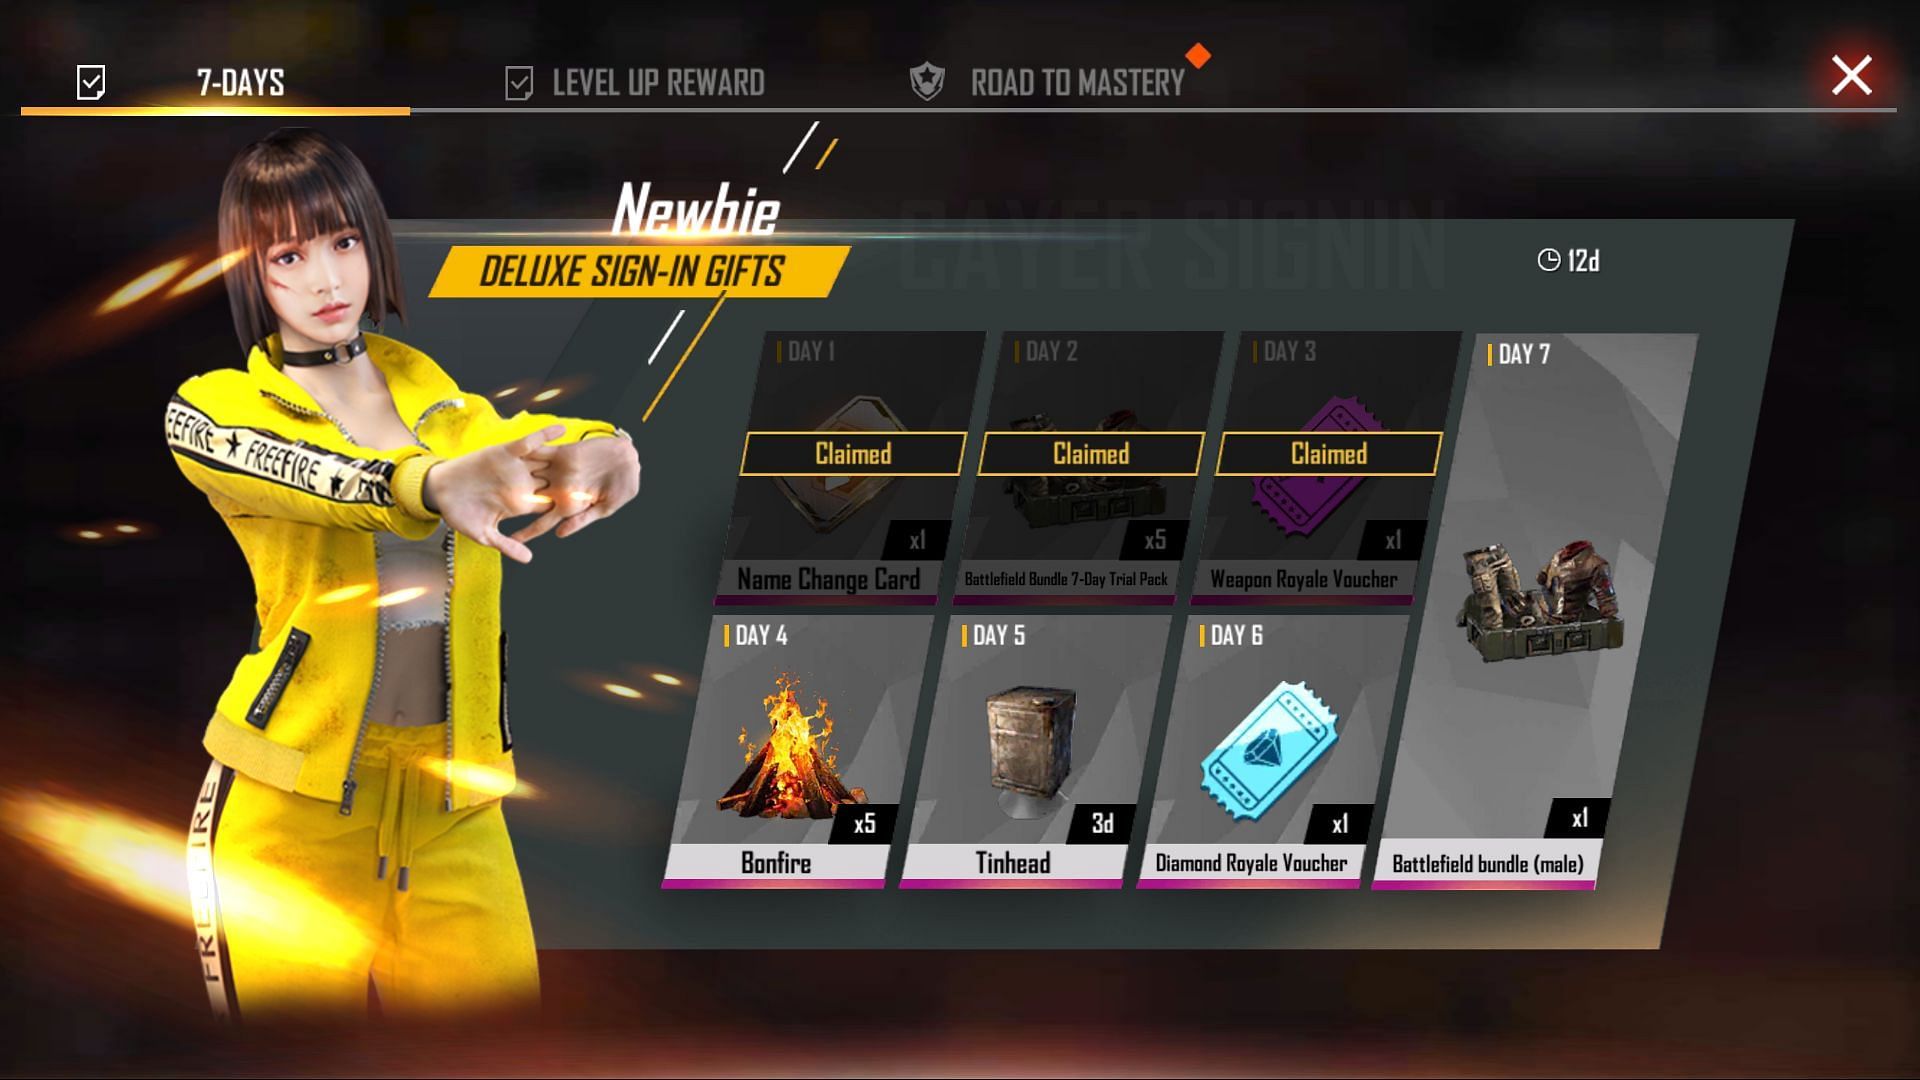 New users are given a free name change card (Image via Free Fire)